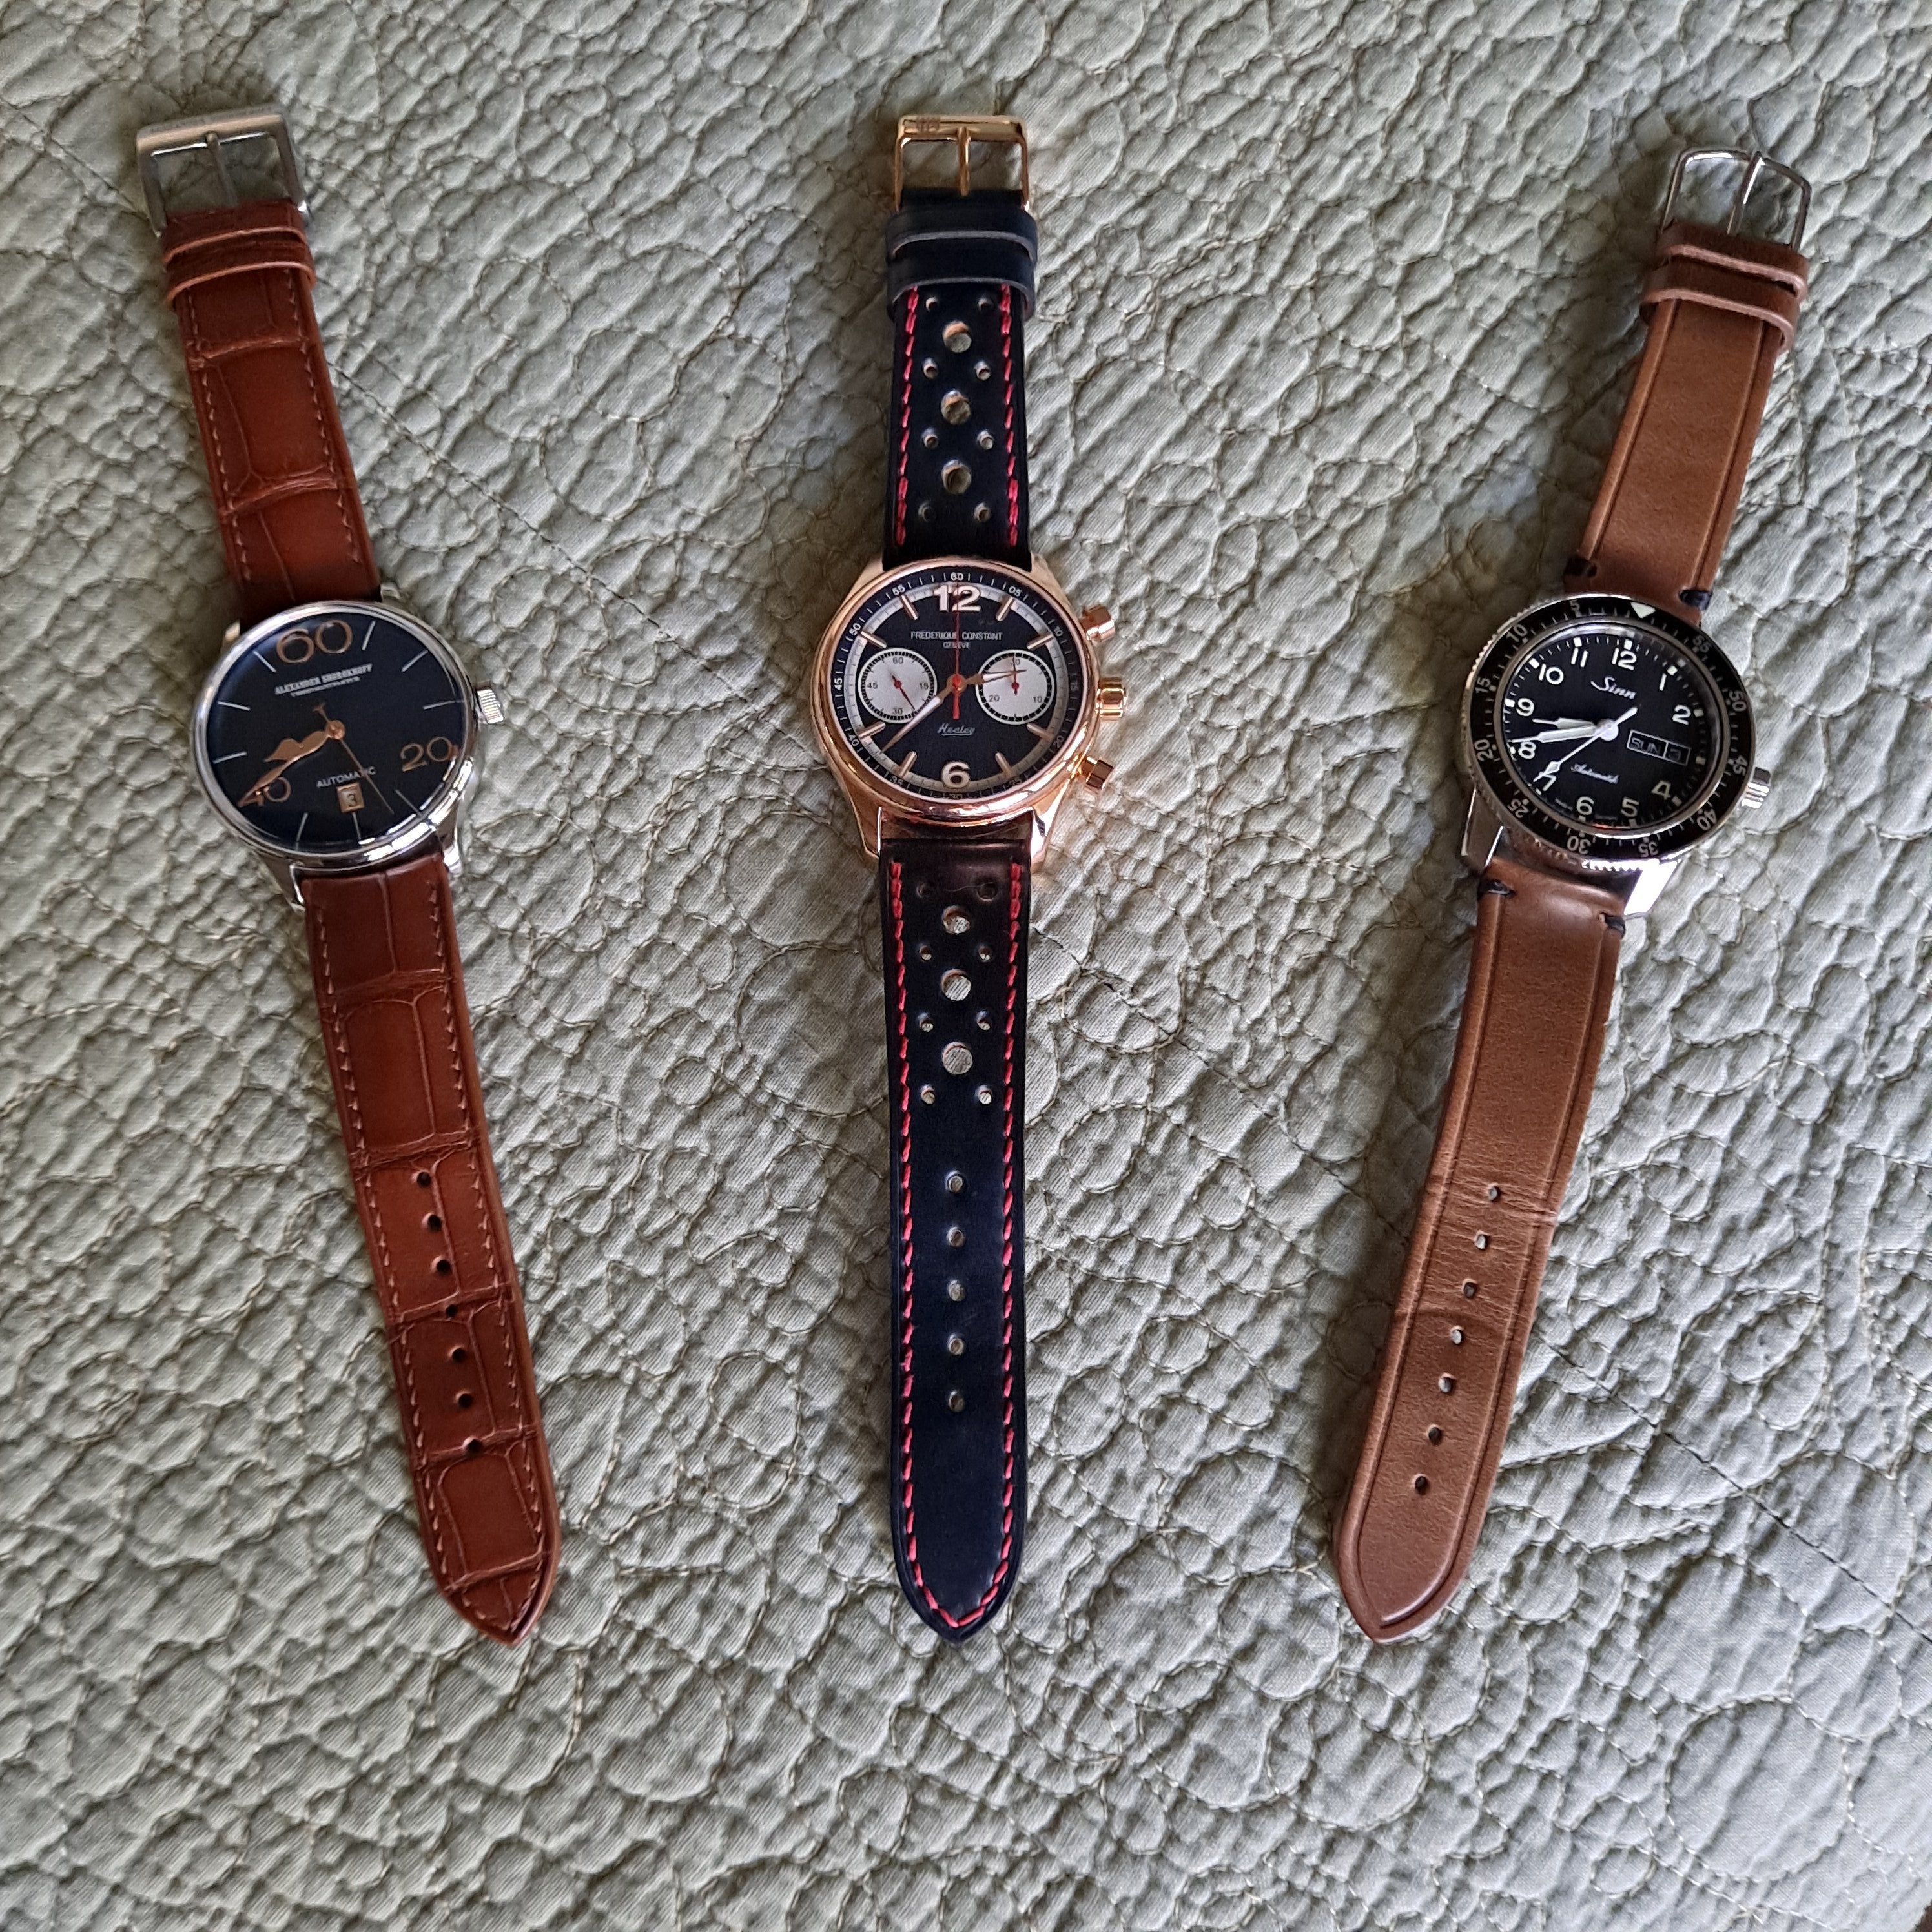 Thanks to Delugs, House of Straps, and B&R! | WatchUSeek Watch Forums